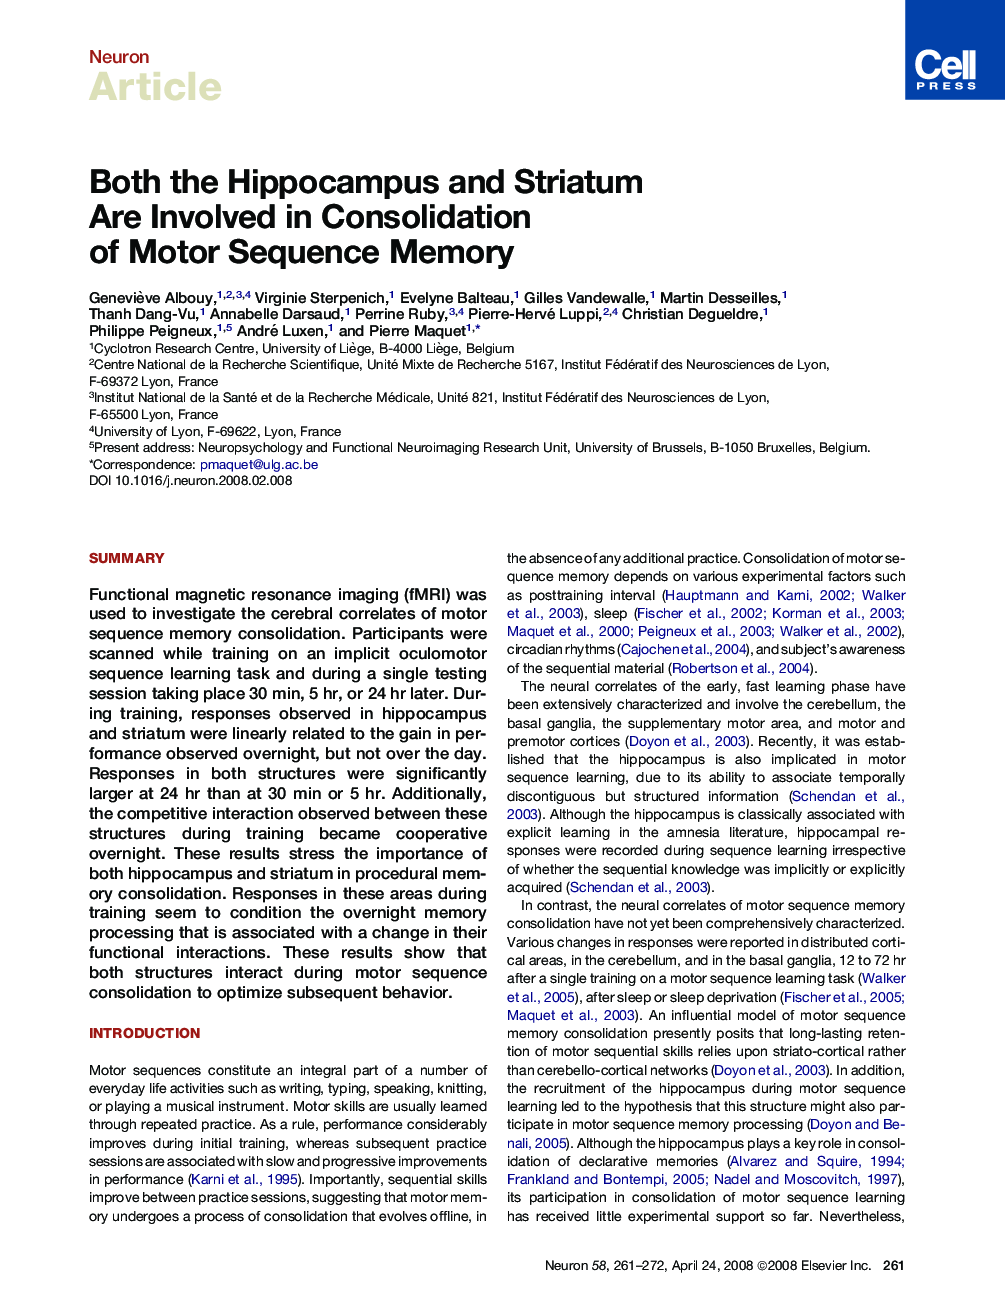 Both the Hippocampus and Striatum Are Involved in Consolidation of Motor Sequence Memory